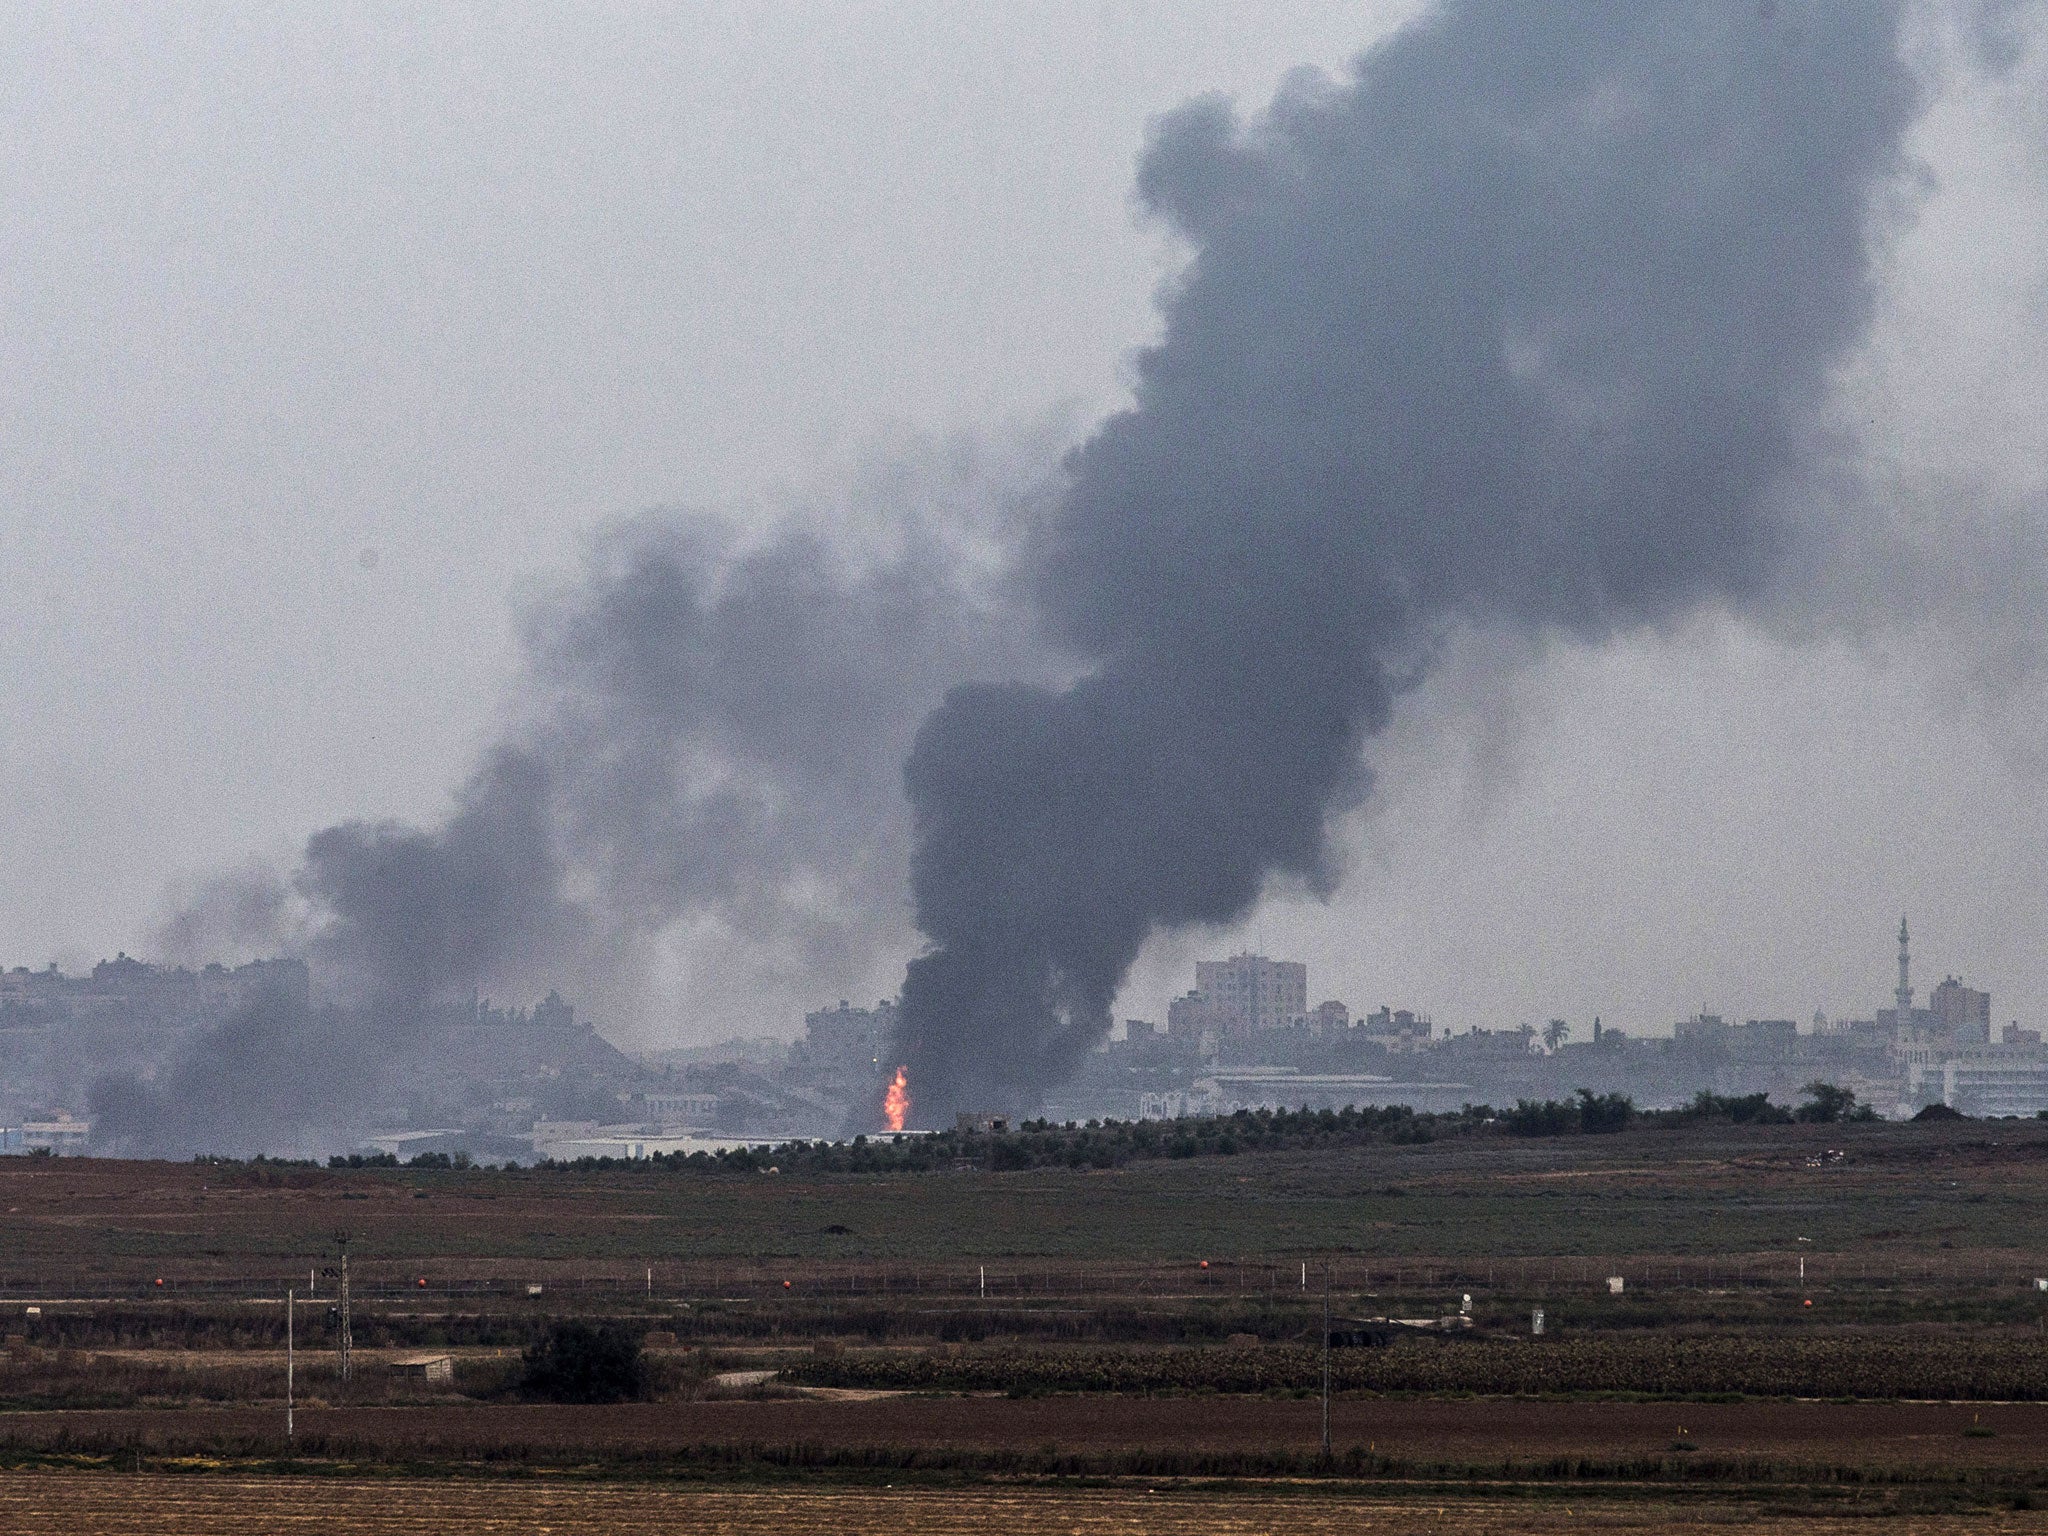 Smoke due to airstrikes and shelling rises from Gaza on July 22, 2014 as seen from near Sderot, Israel